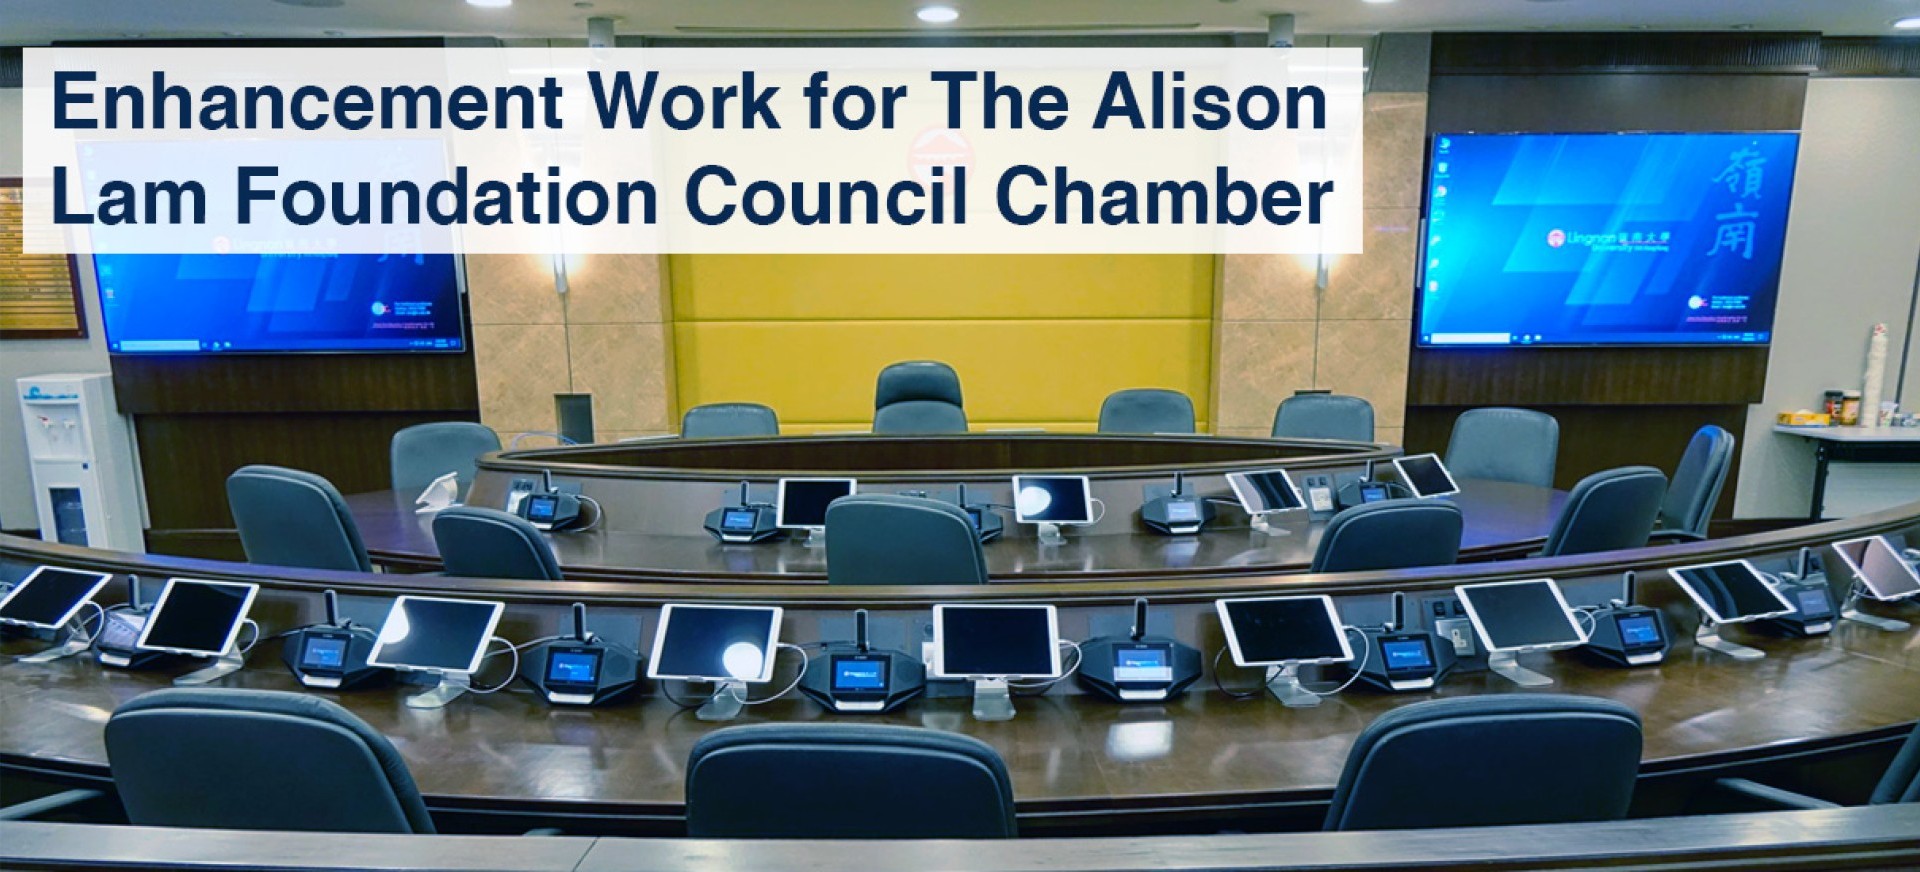 Enhancement Work for The Alison Lam Foundation Council Chamber